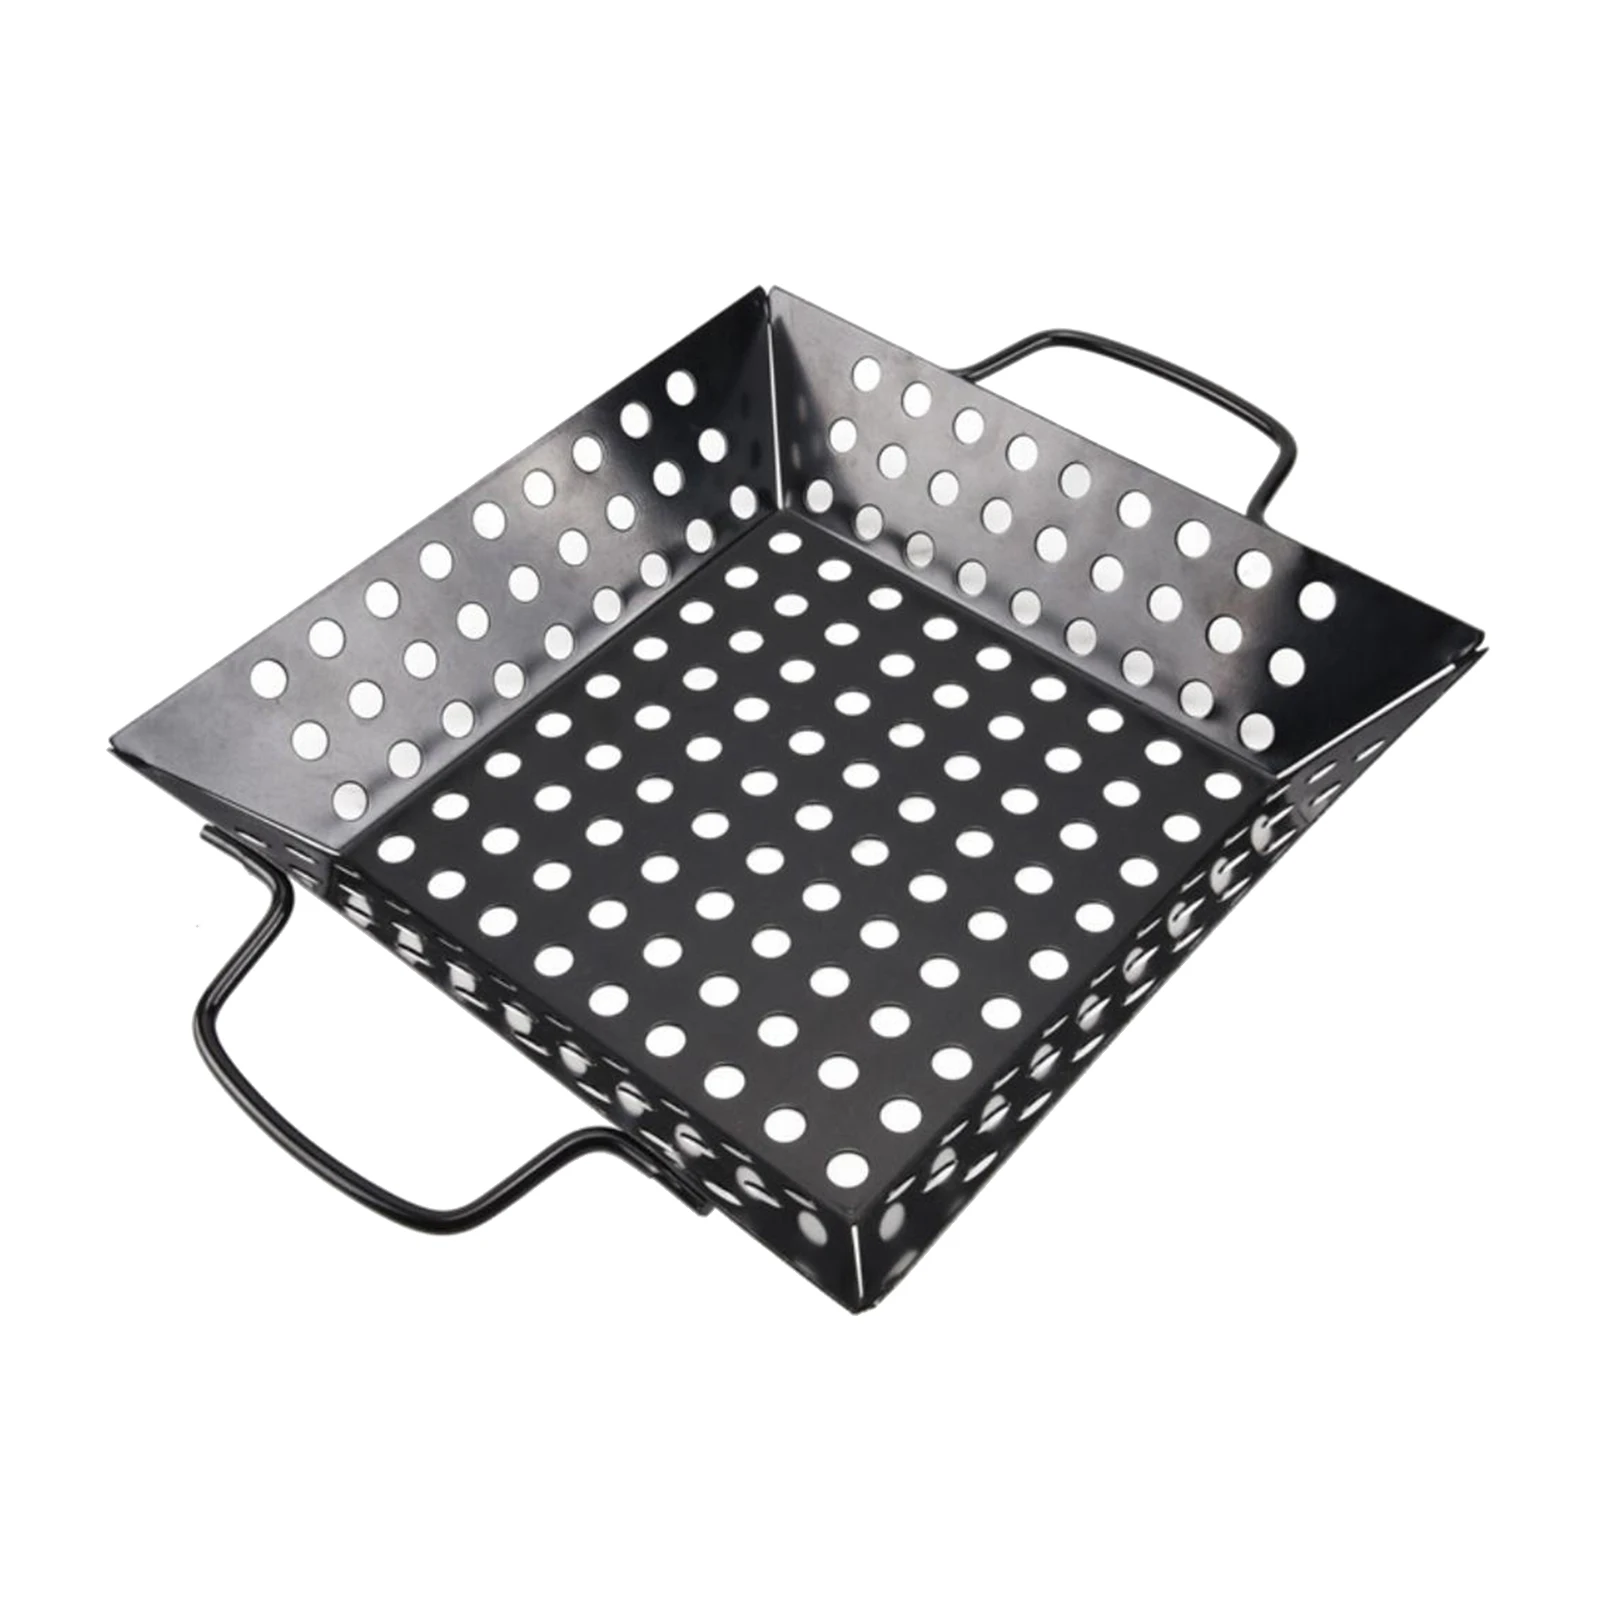 Grill Topper BBQ Grilling Pans Non-Stick Carbon Steel Barbecue Trays for Cooking Meat, Vegetables, Easy to Clean